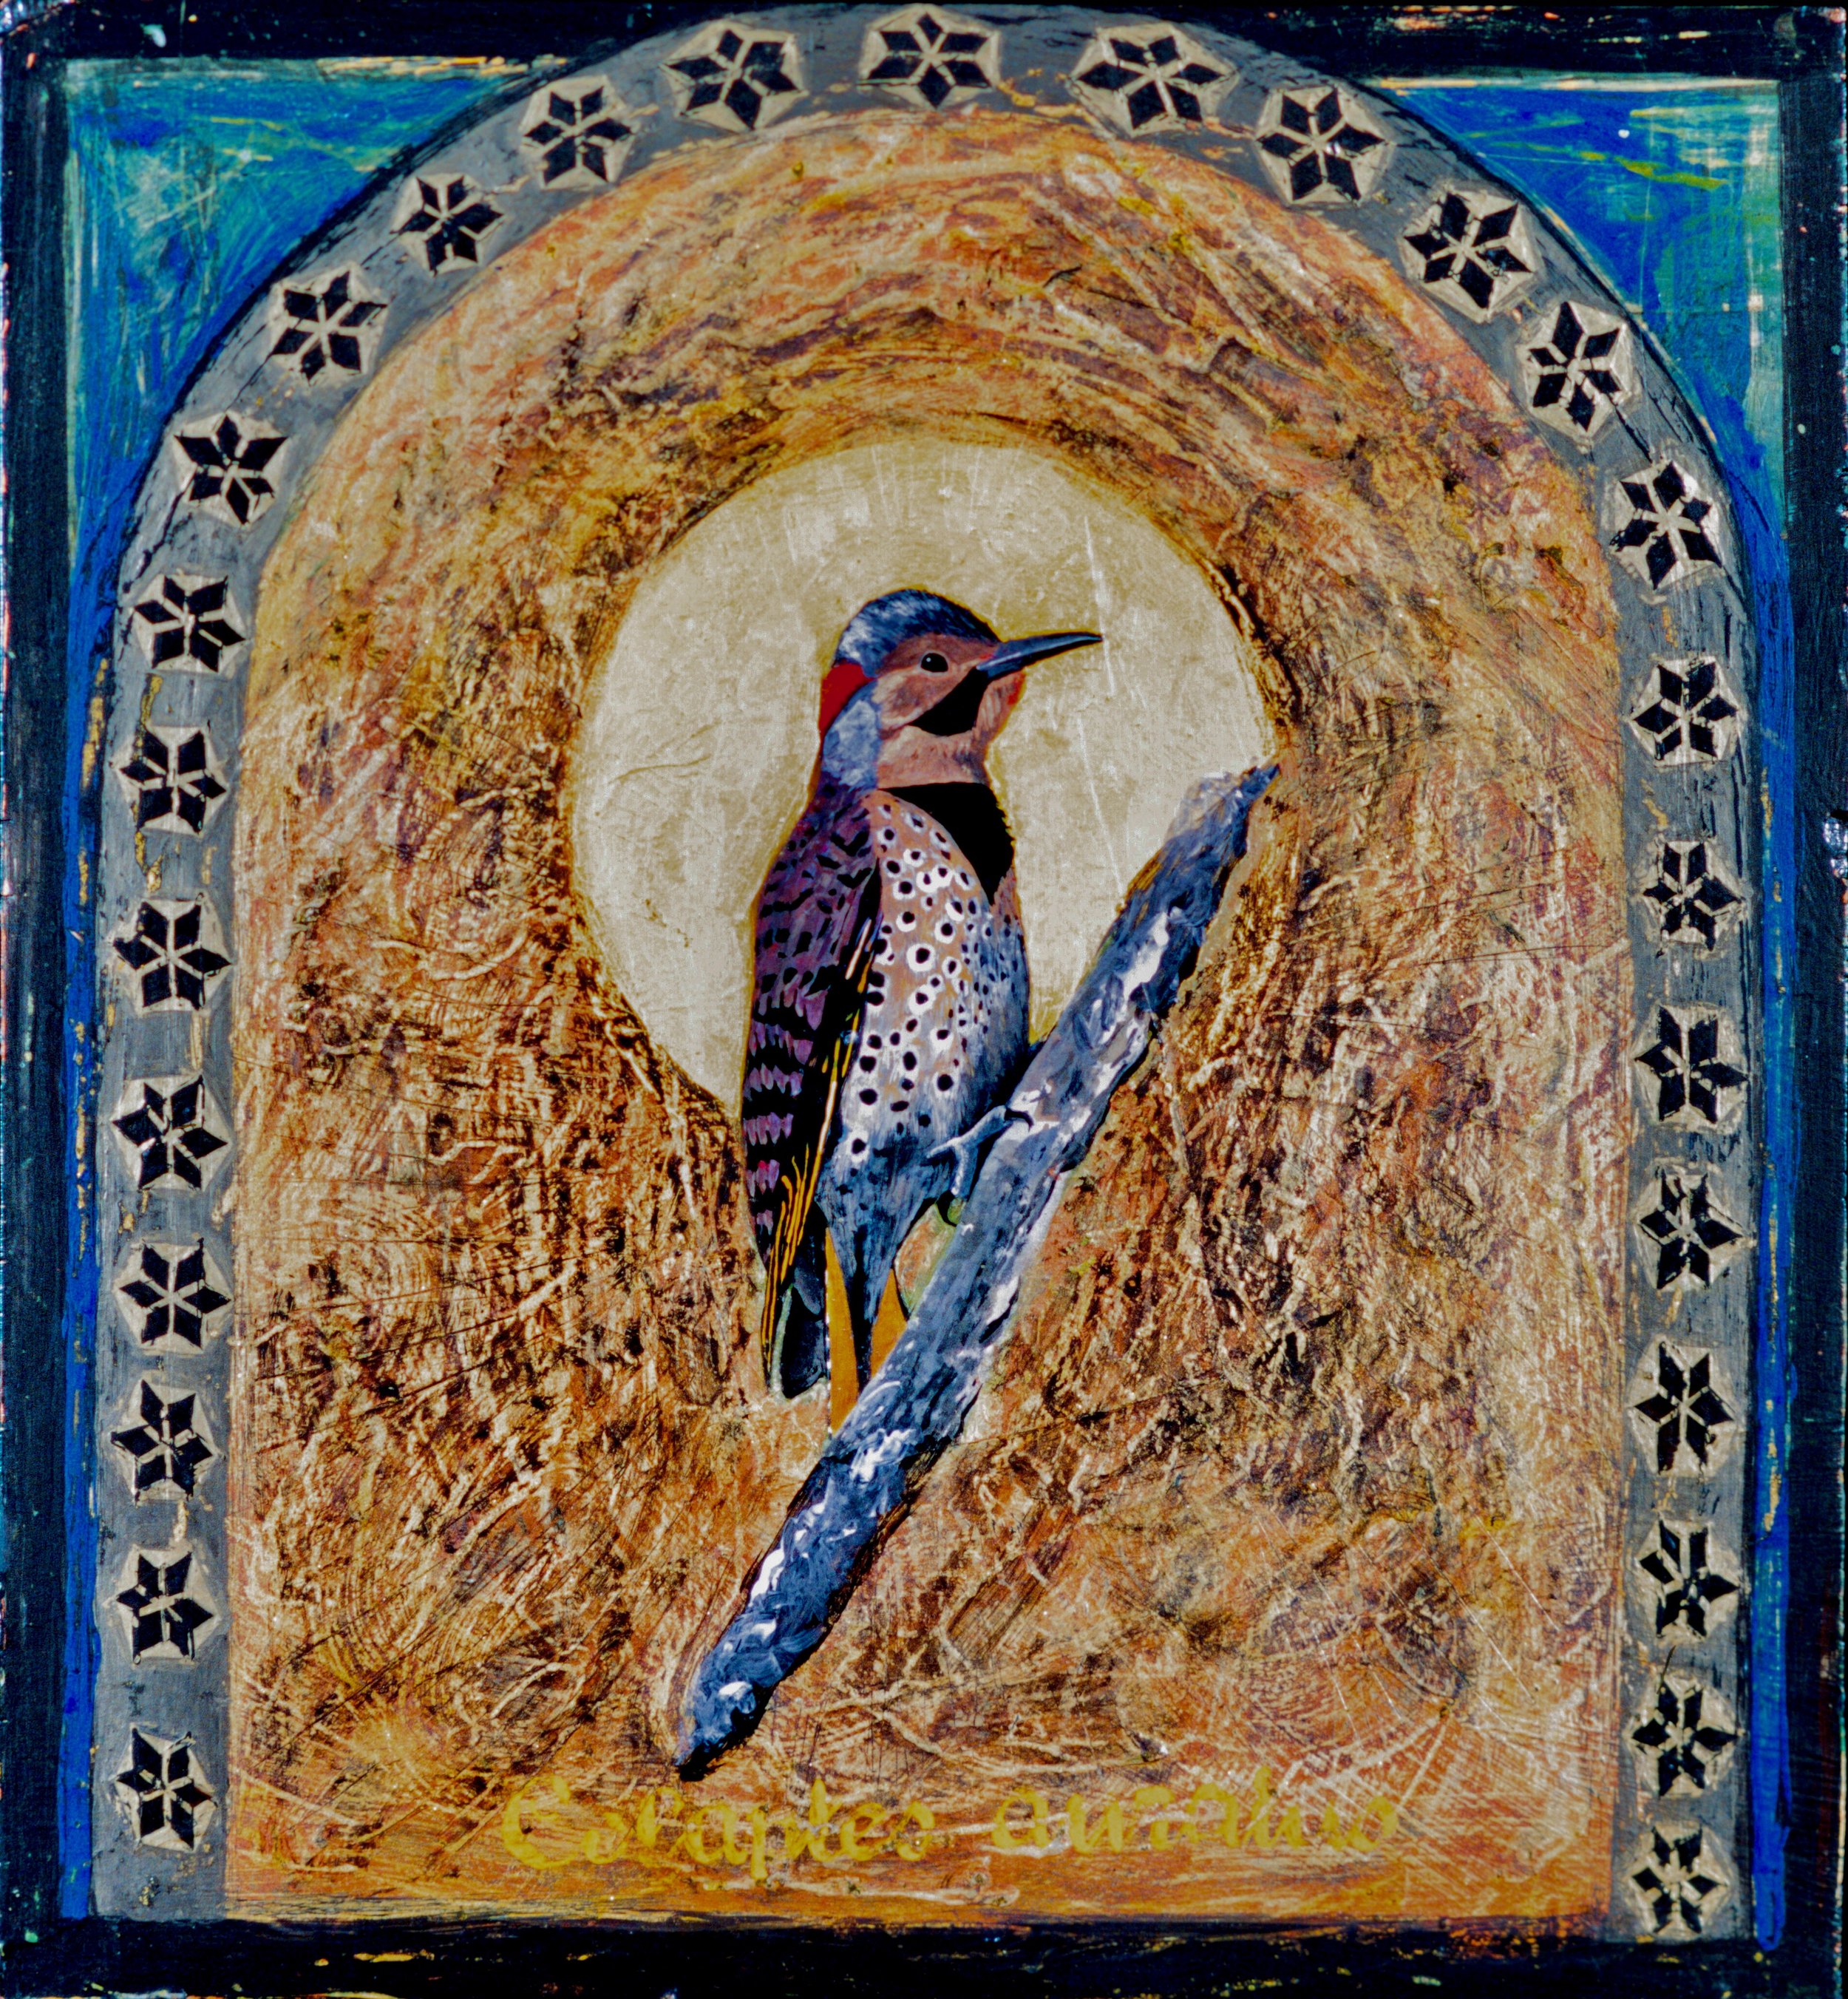 Northern Flicker, 2001, 23 ½ x 19 ½, gouache and acrylic on wood panel, Sold